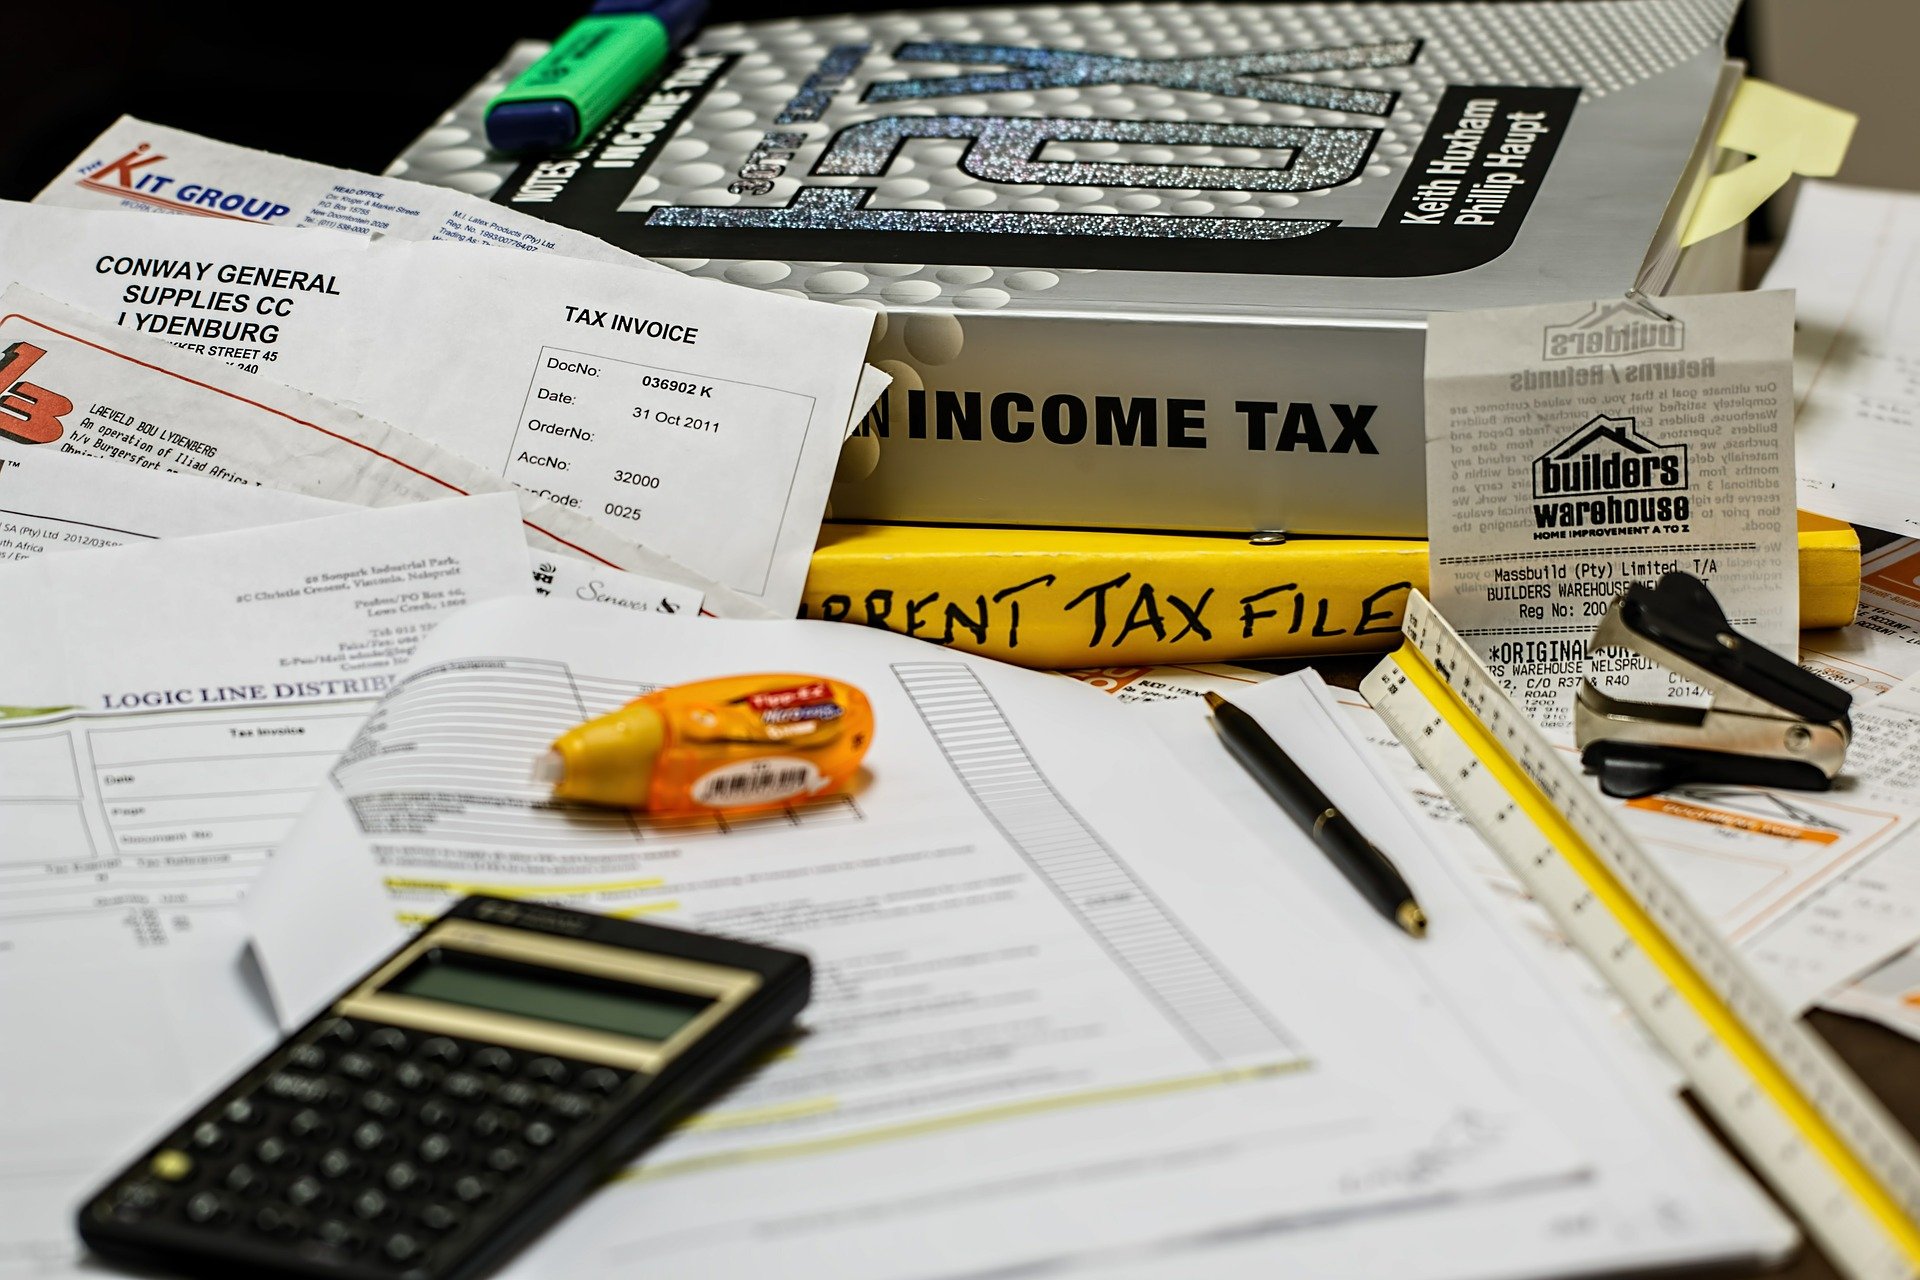 Tax books and invoices placed on a table with calculator and other stationery items lying alongside.